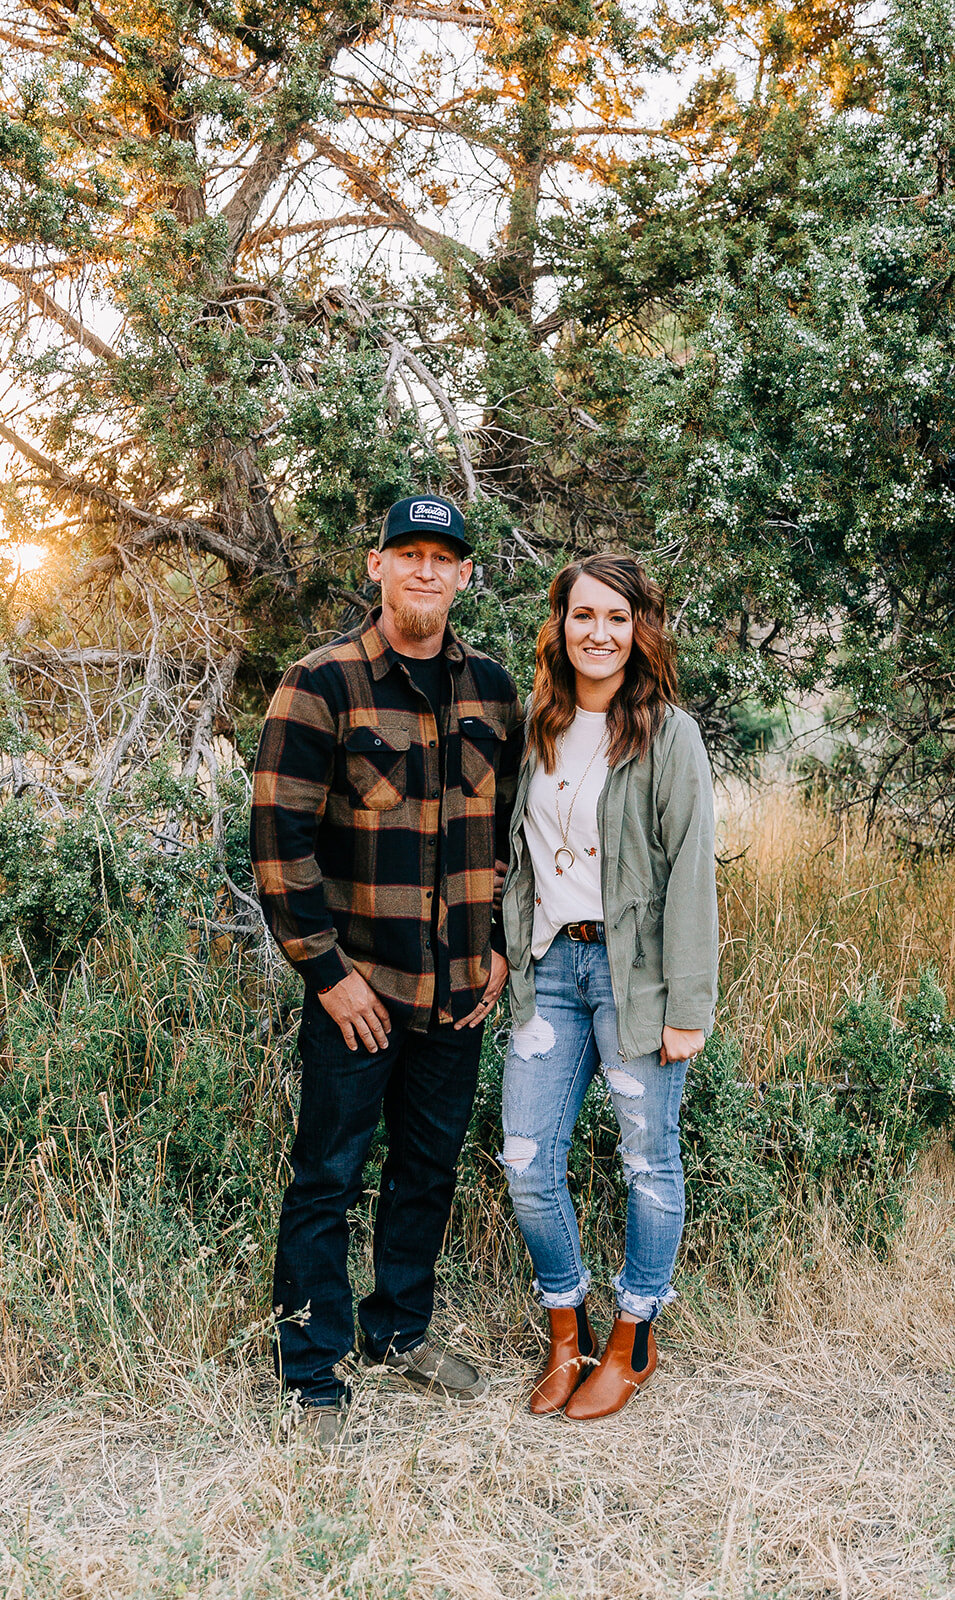  couples photography photoshoot for fashion clothing boutique the classic shop outfit inspiration men and women’s clothing line casual outfit styles plaid button-up with denim white tee with green cargo jacket and distressed jeans tremonton utah clot